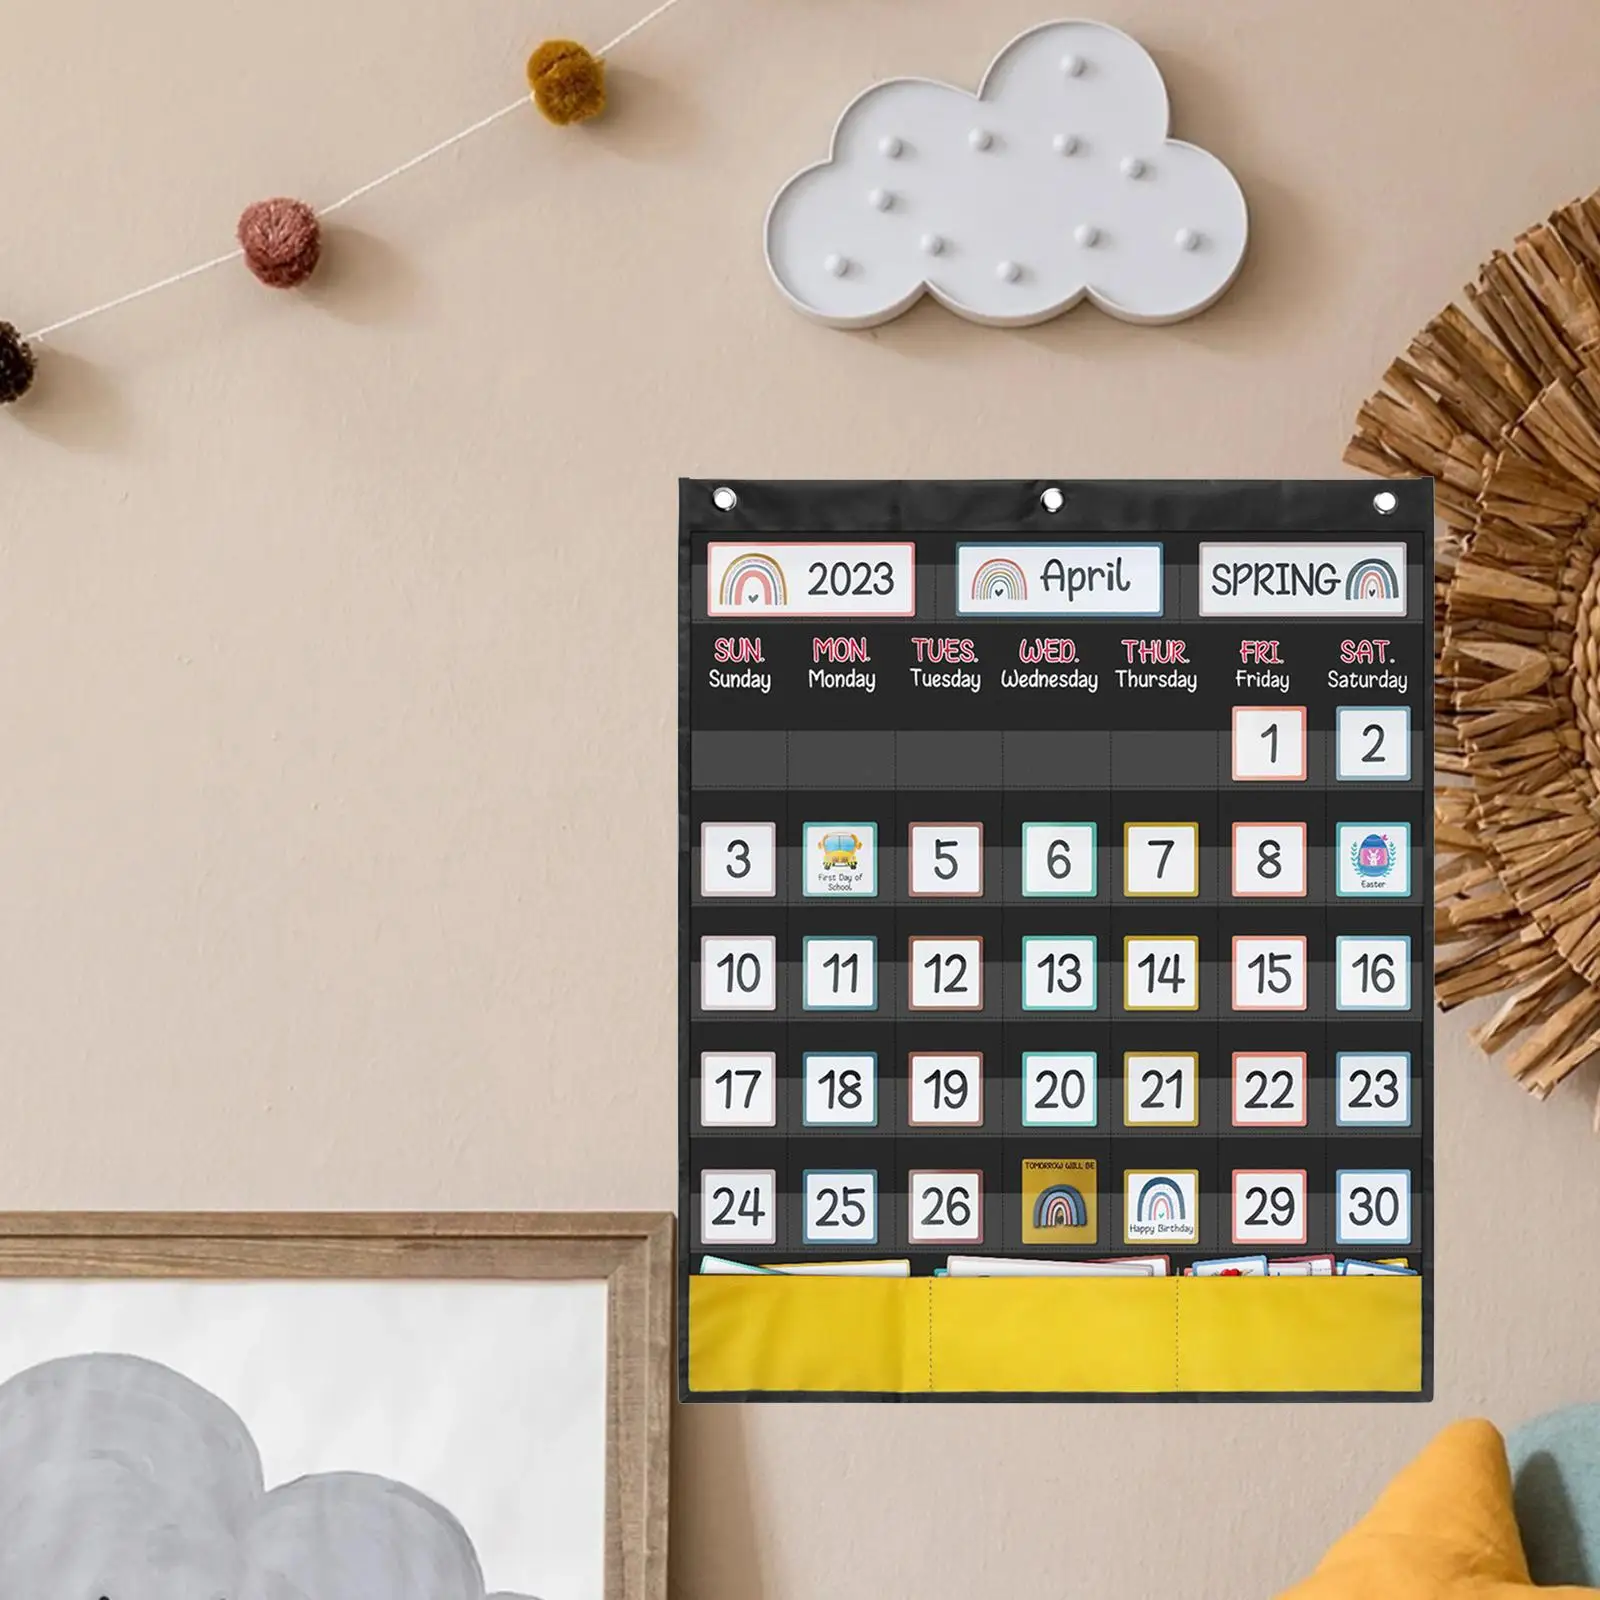 Calendar Pocket Chart Education Home Helping Young Students Early Learning Teacher Supplies Classroom Organized Chart